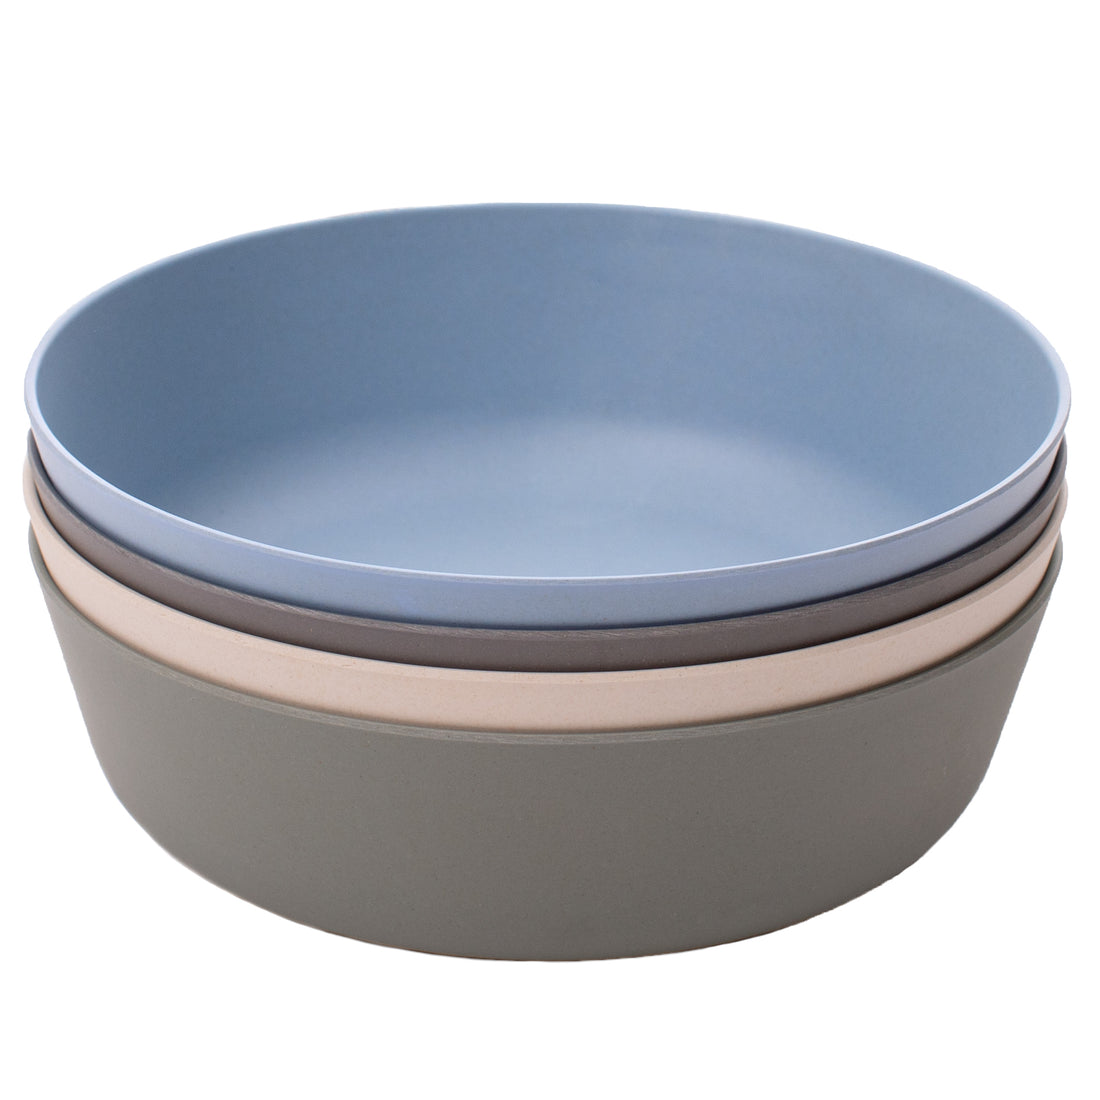 WeeSprout Bamboo, Silicone, Melamine Dishware Plate with Lids, Set